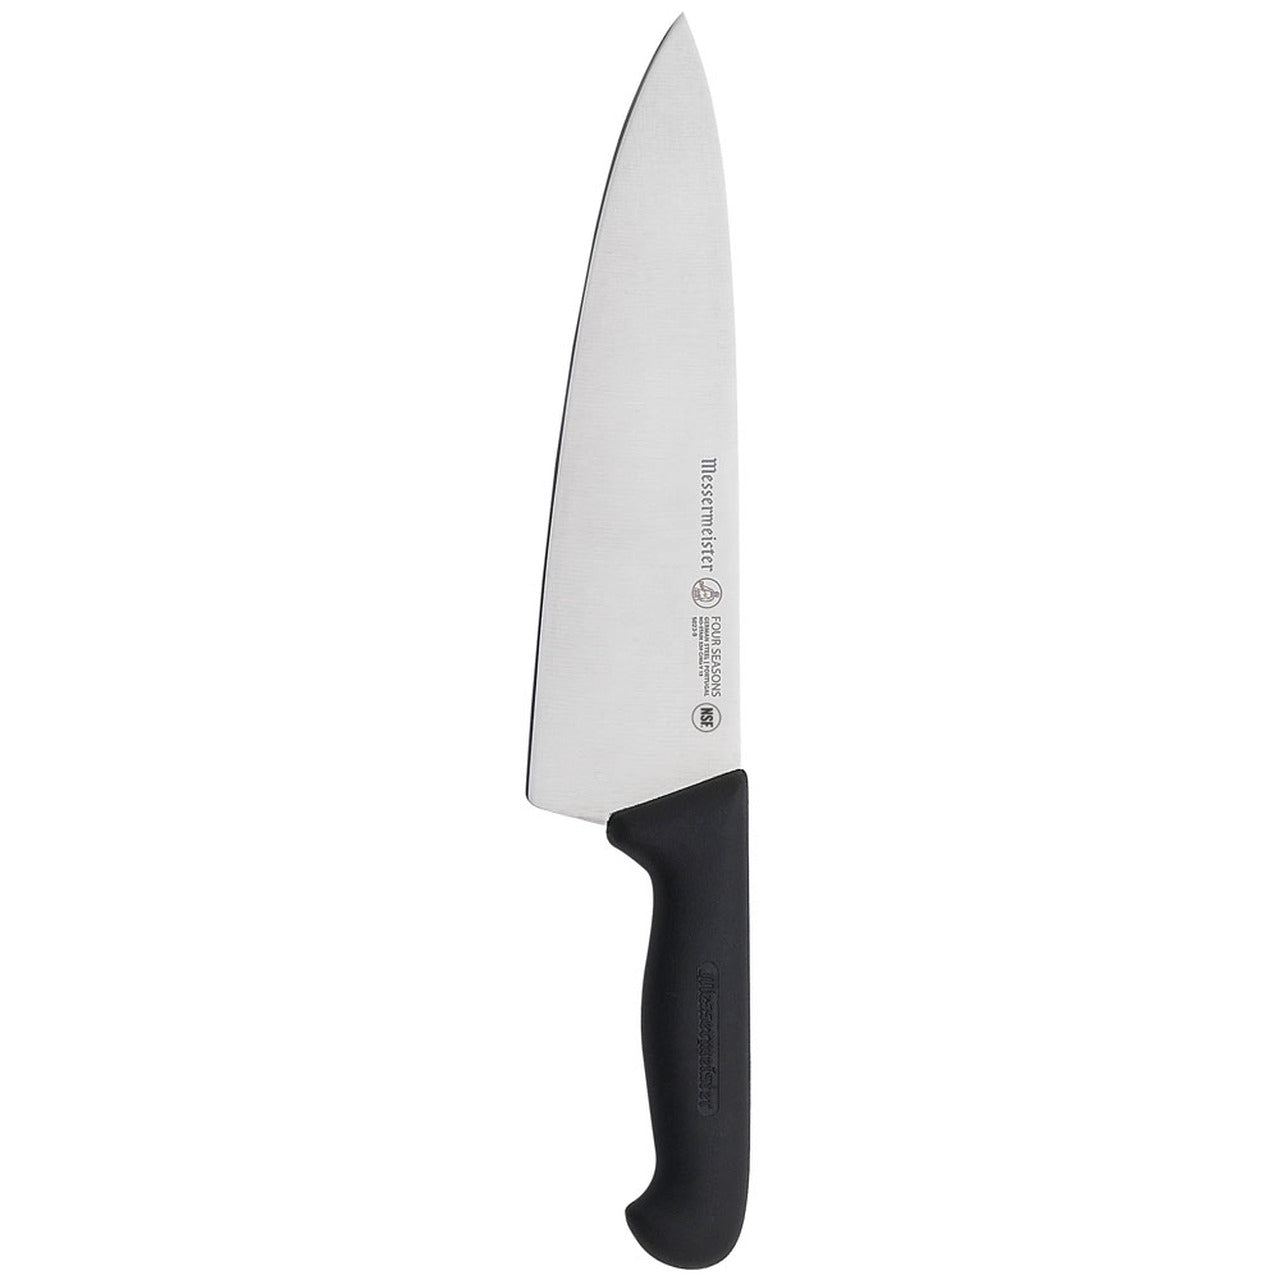 BEON.COM.AU 5023 9         Four Seasons 9 Inch Wide Blade Chef's Knife The Messermeister Four Seasons 9” Chef’s Knife is the workhorse in every kitchen. You'll gravitate towards this knife and find yourself using it for 90% of all your cutting tasks.  It has a commercial grade oversized, molded hygie... Messermeister at BEON.COM.AU